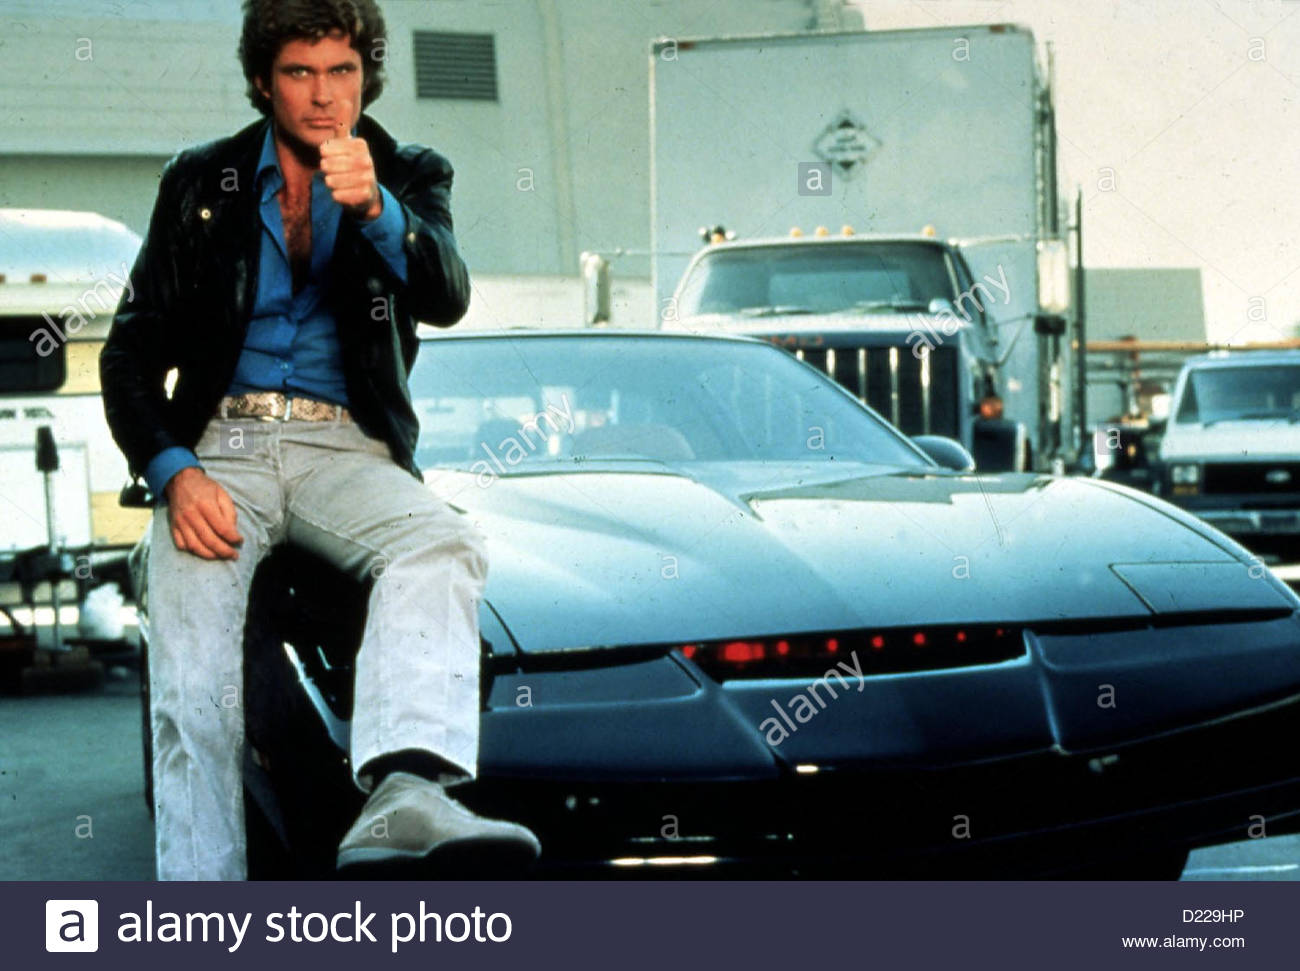 David Hasselhoff Wallpapers 37 images inside